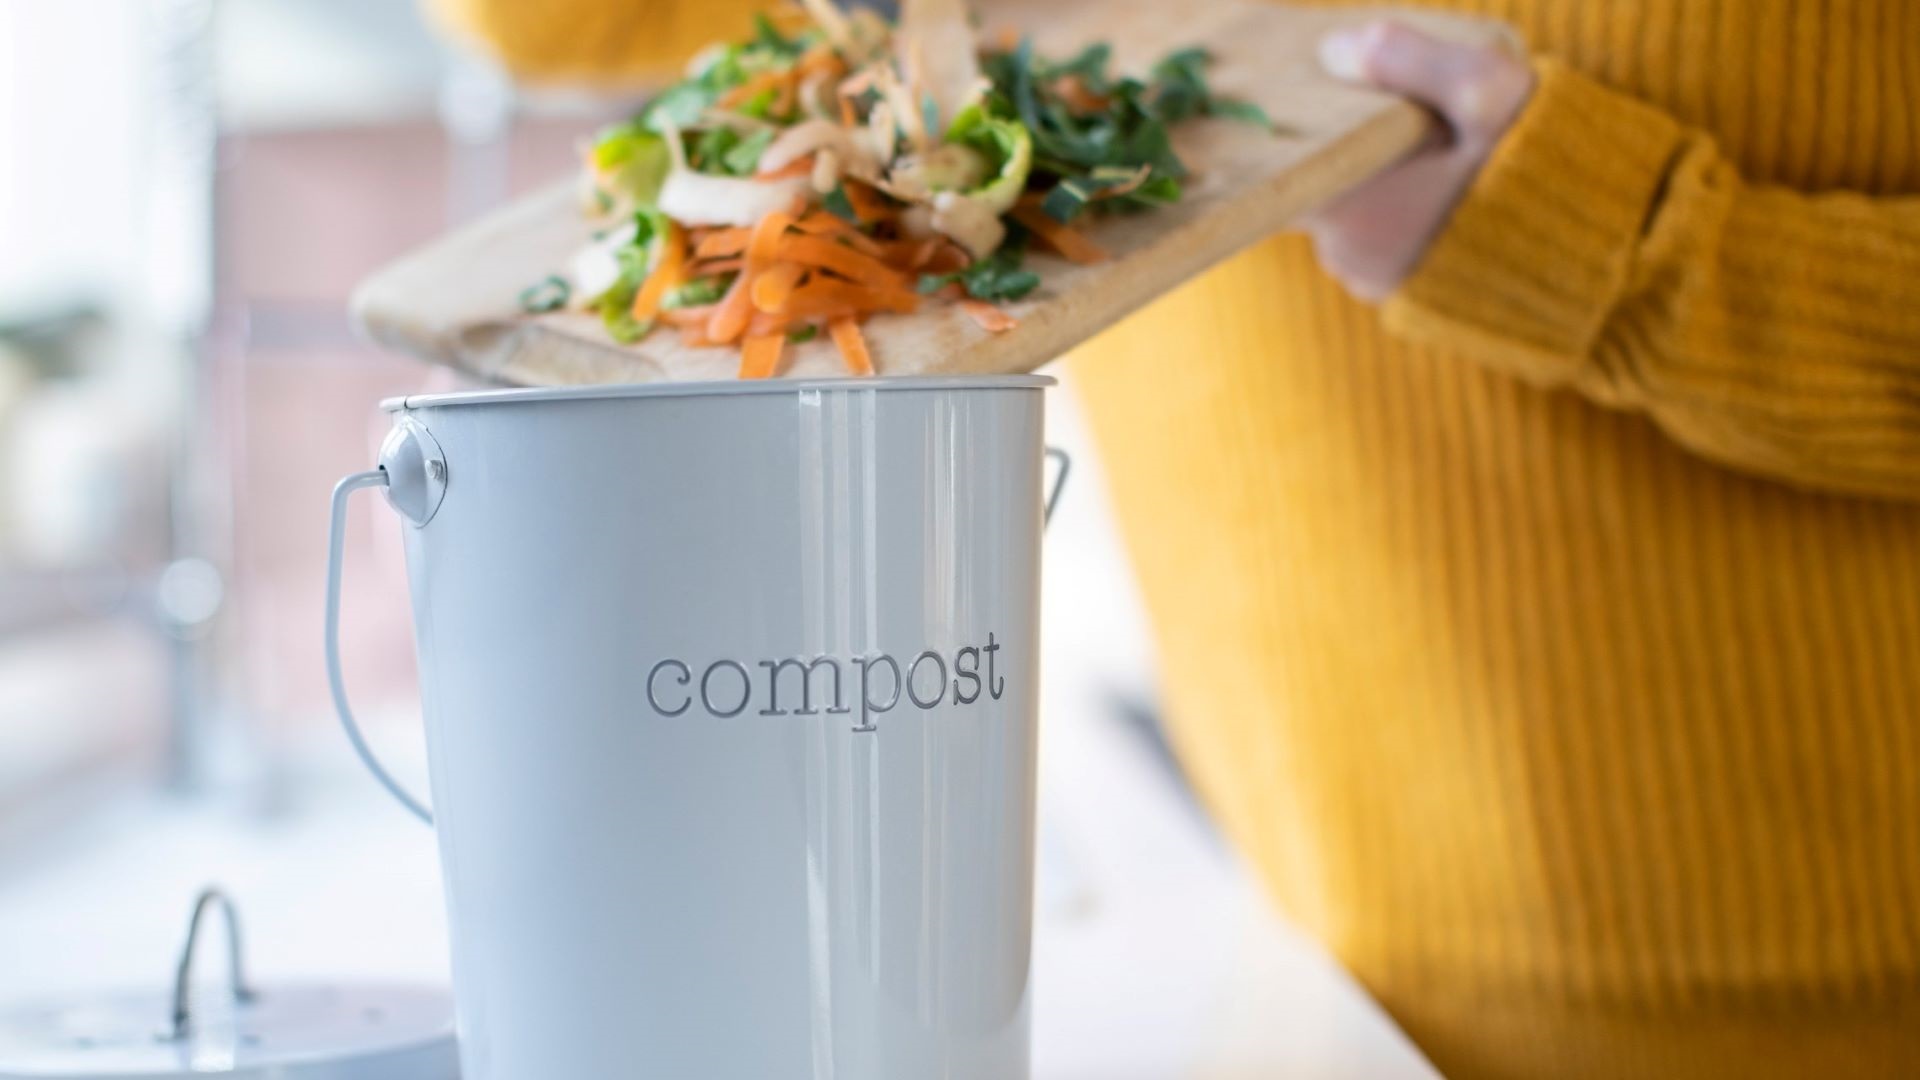 Photo shows person scraping vegetable peelings from a chopping board into a compost bin on the kitchen bench.